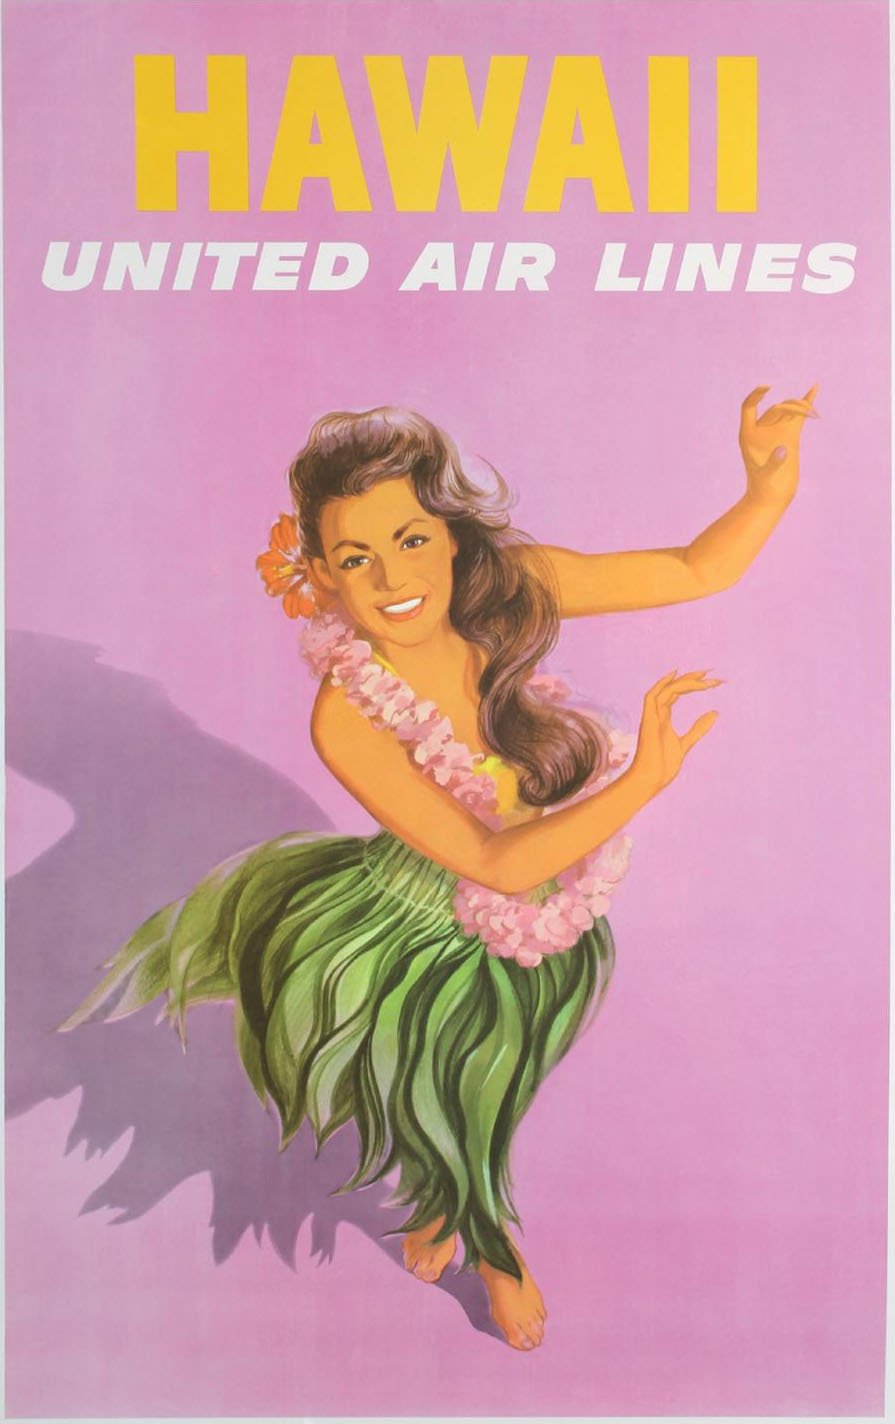 United-Airlines-Hawaii-travel-poster.jpg